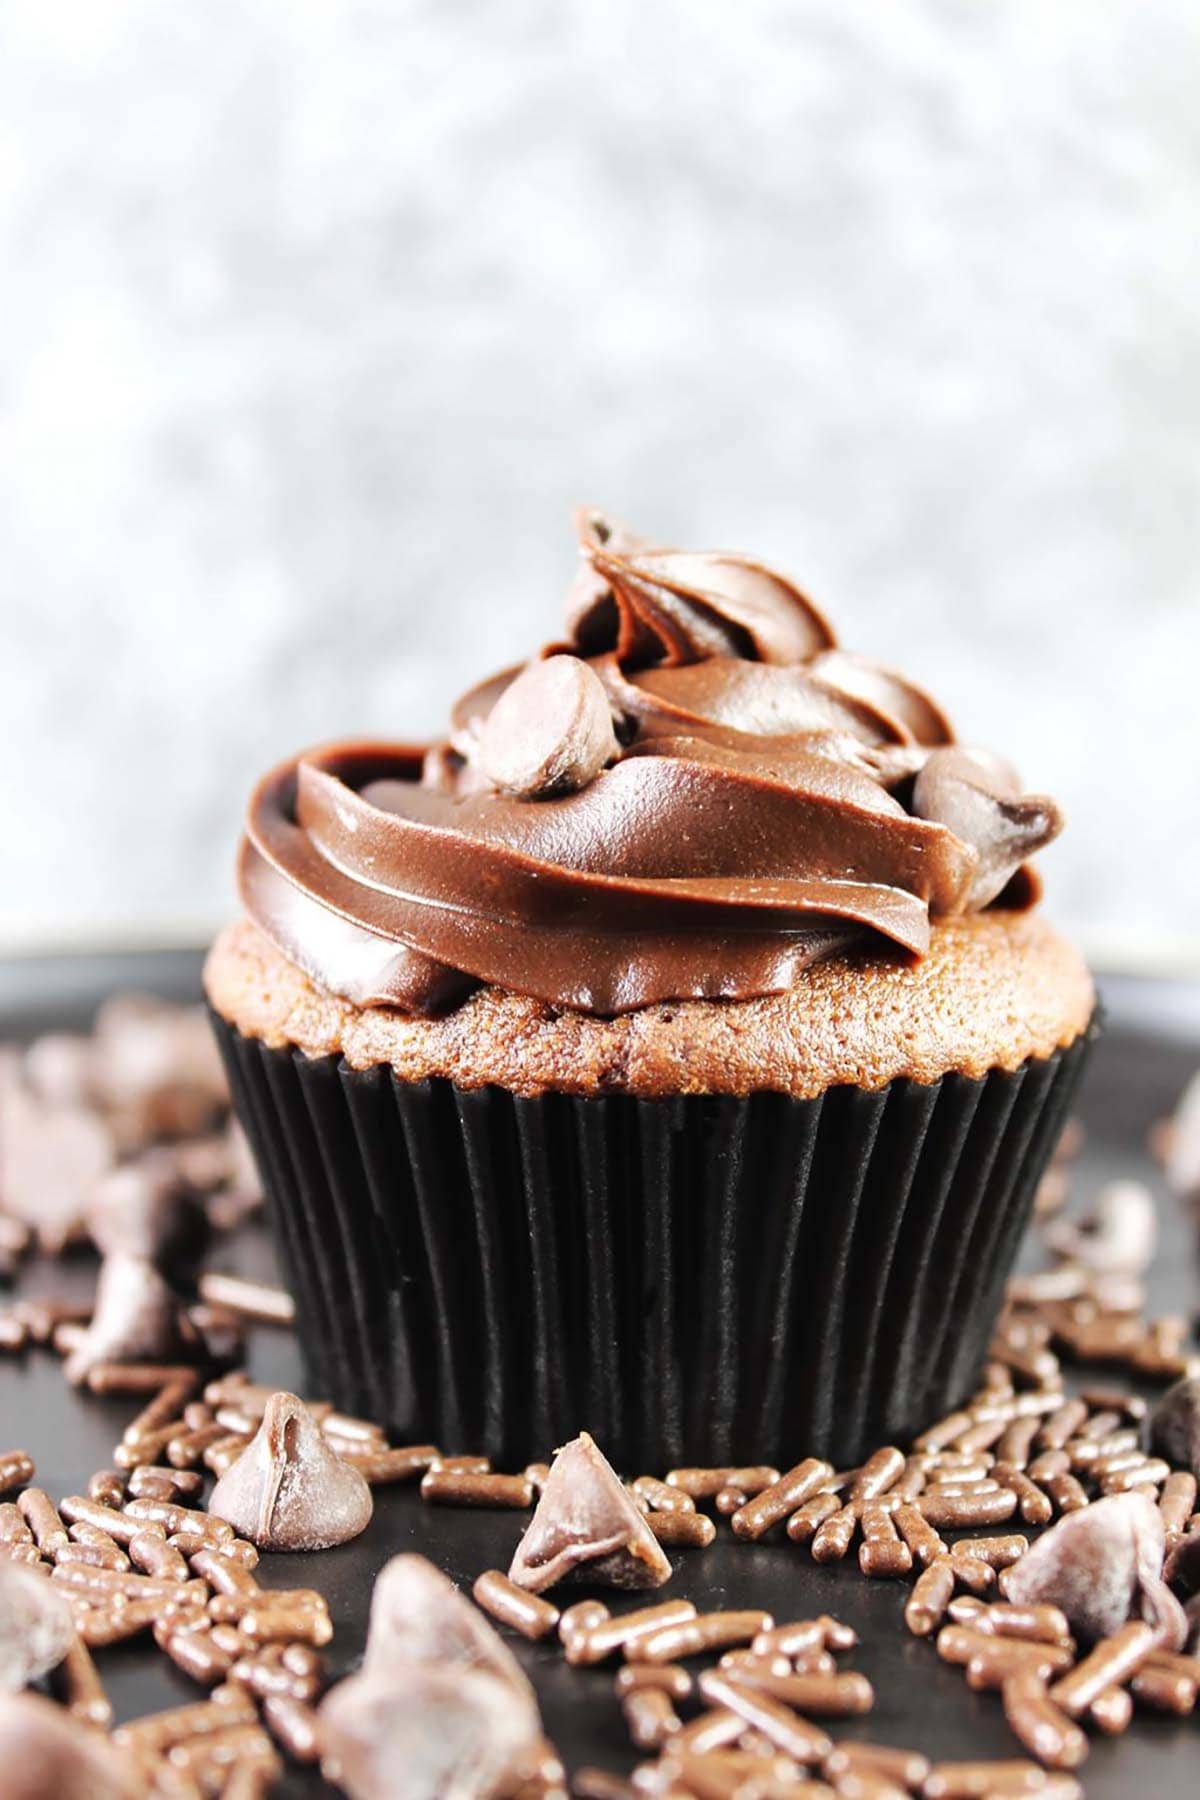 Chocolate chip cupcakes recipe with French ganache.